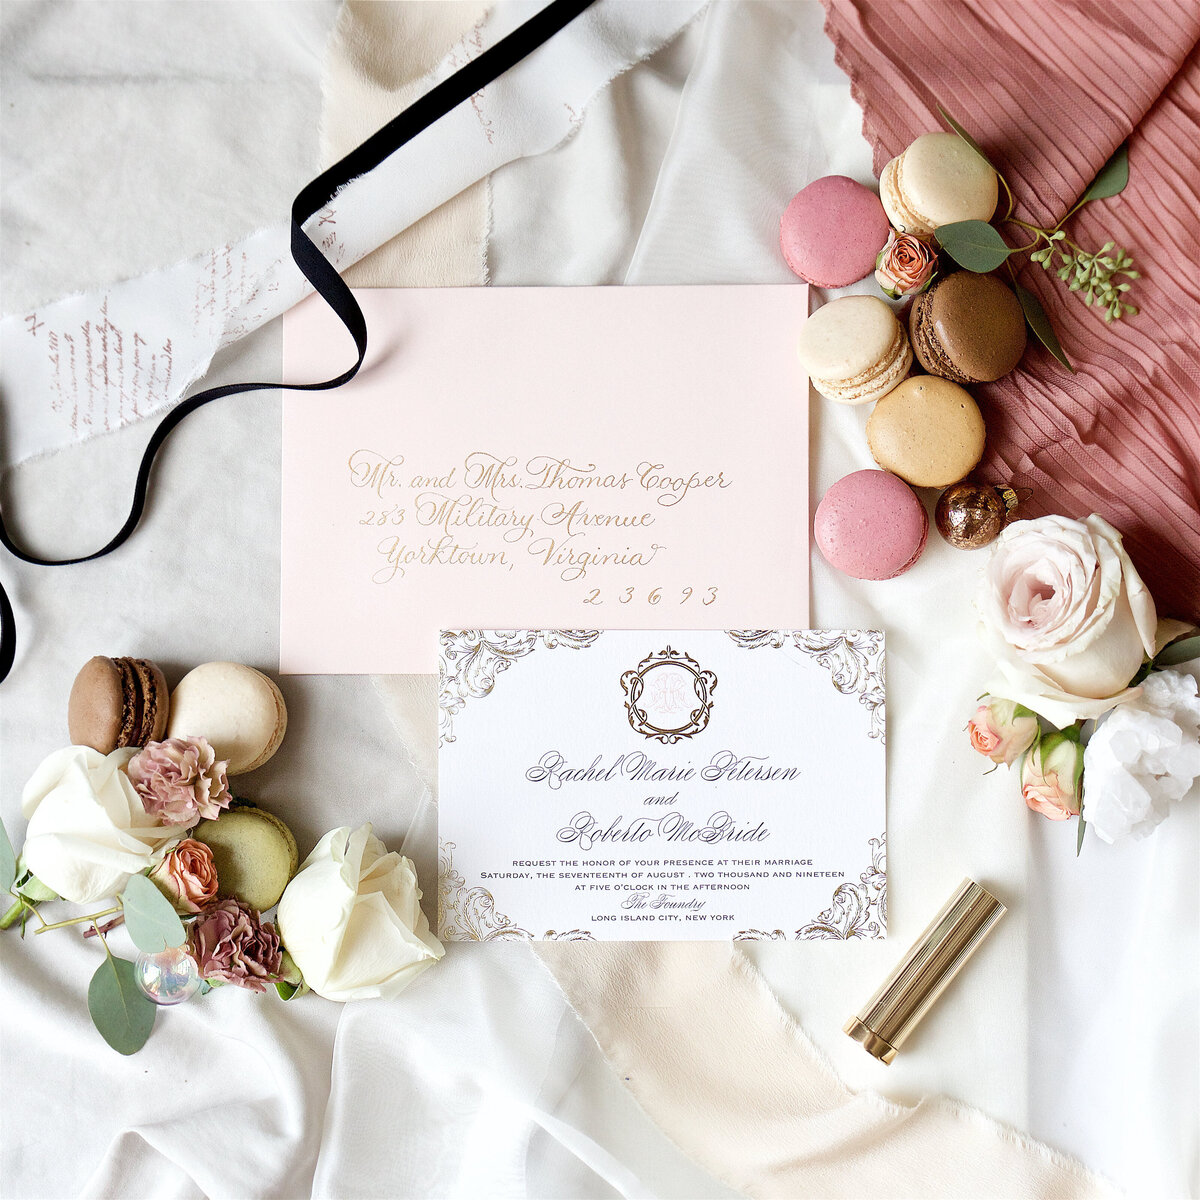 Etsy photographer for small businesses — invitation suites, calligraphy, small products.